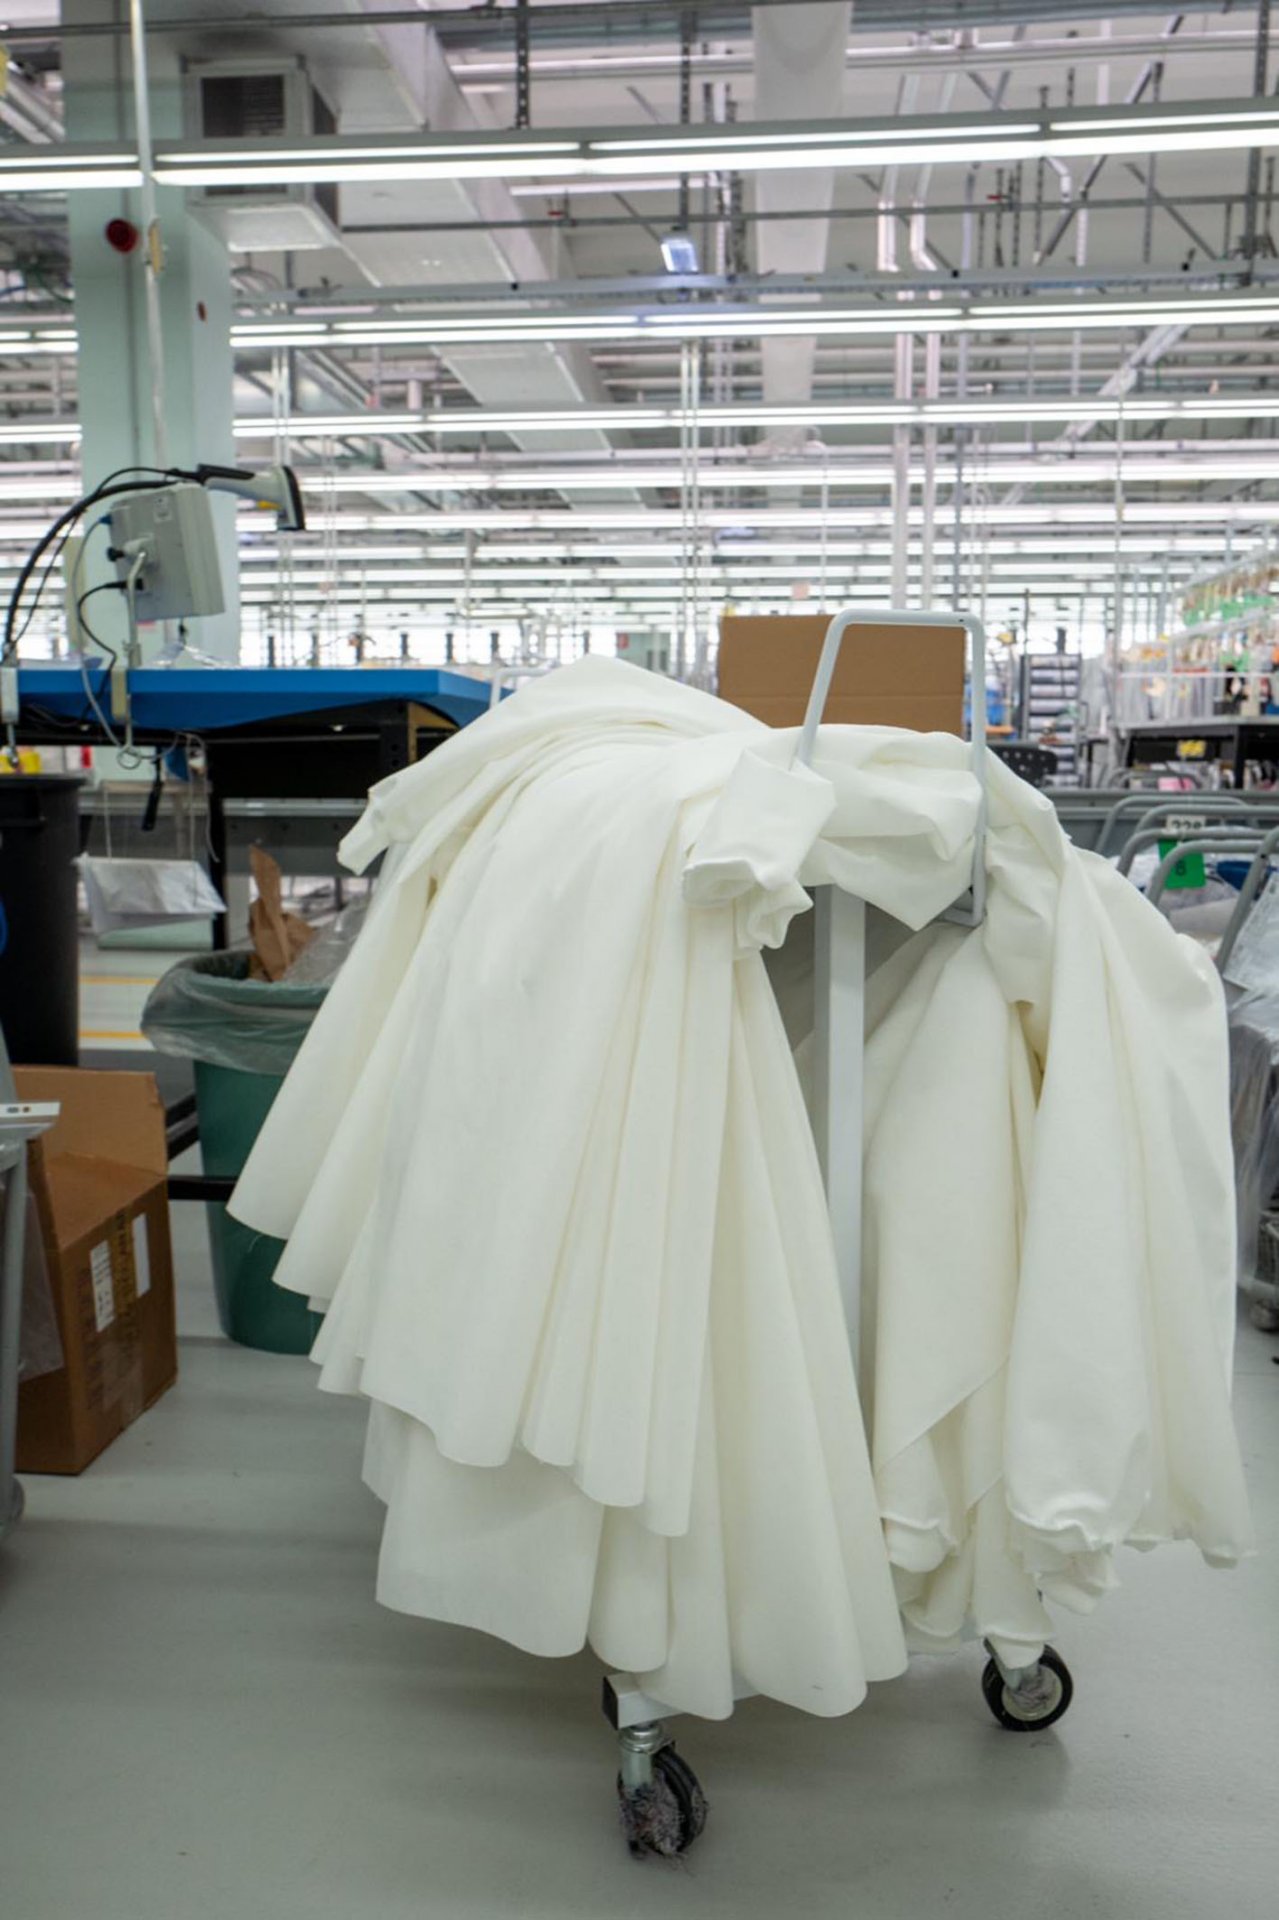 THE ZEGNA GROUP TO MANUFACTURE 280,000 PROTECTIVE HOSPITAL SUITS (3)